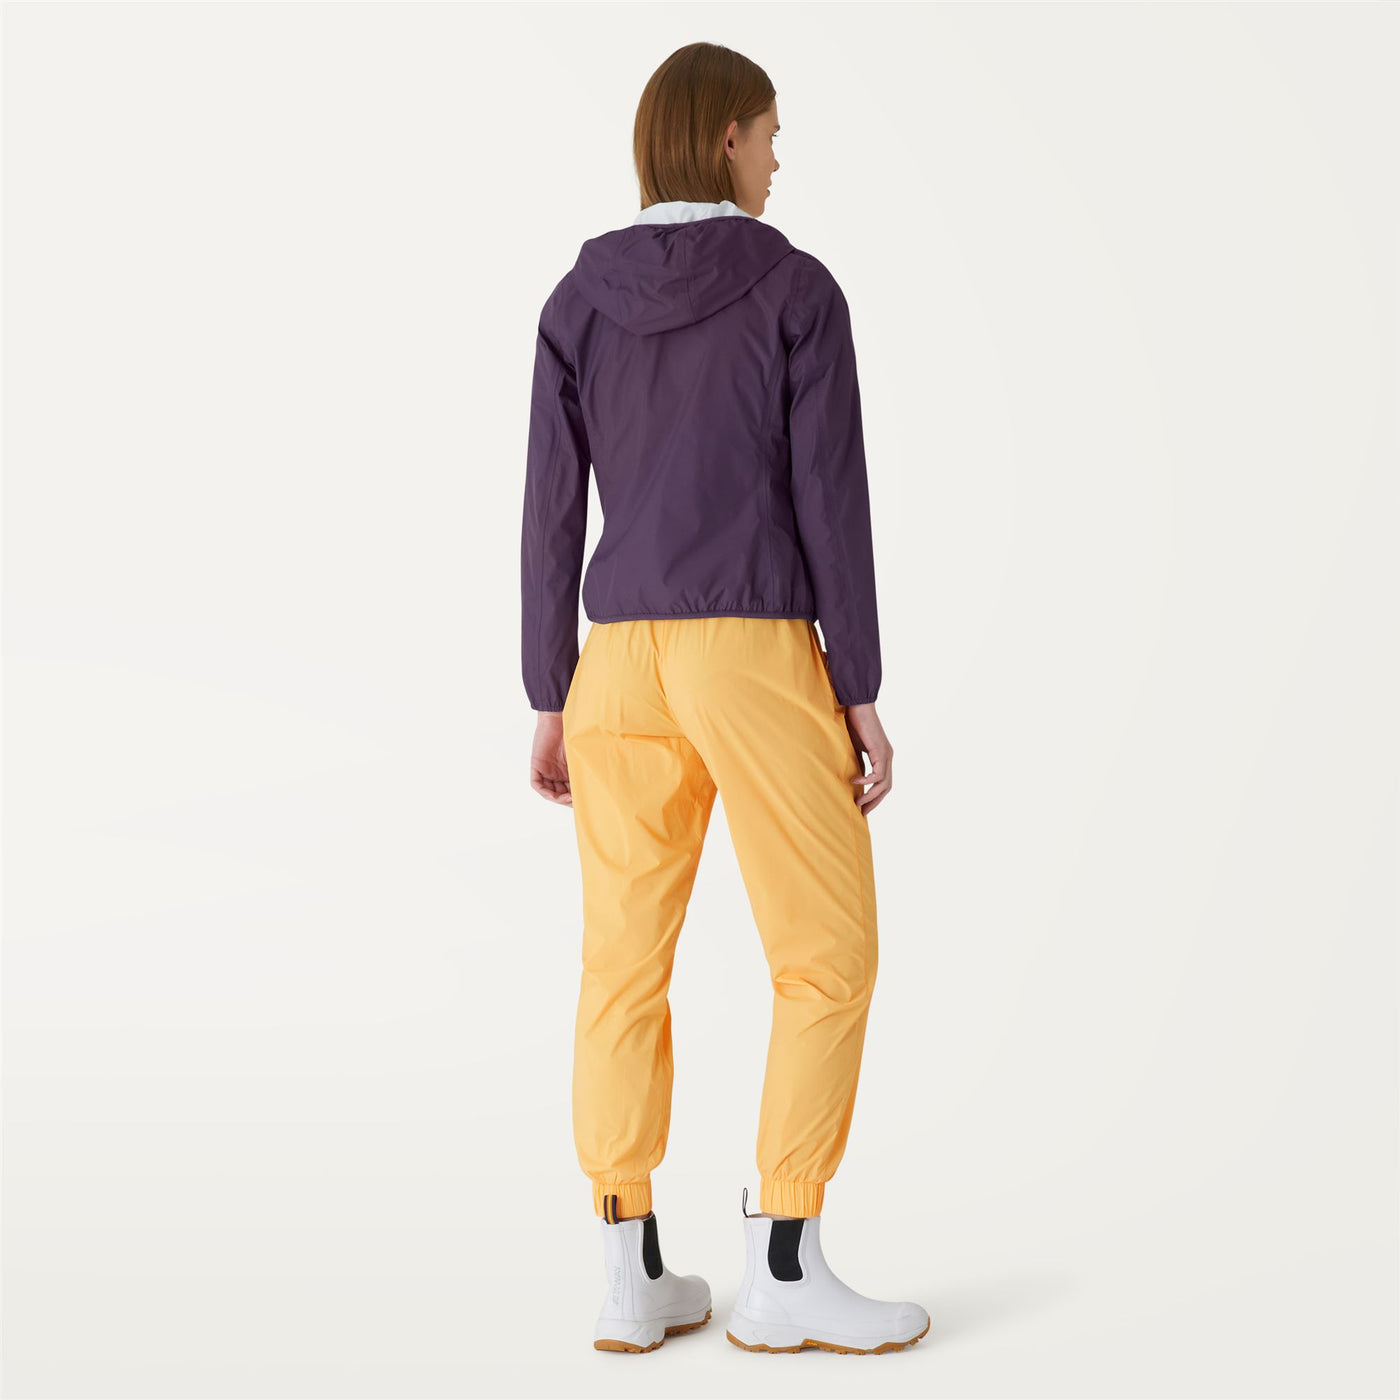 Jackets Woman LILY PLUS.2 DOUBLE Short VIOLET - WHITE | kway Dressed Front Double		